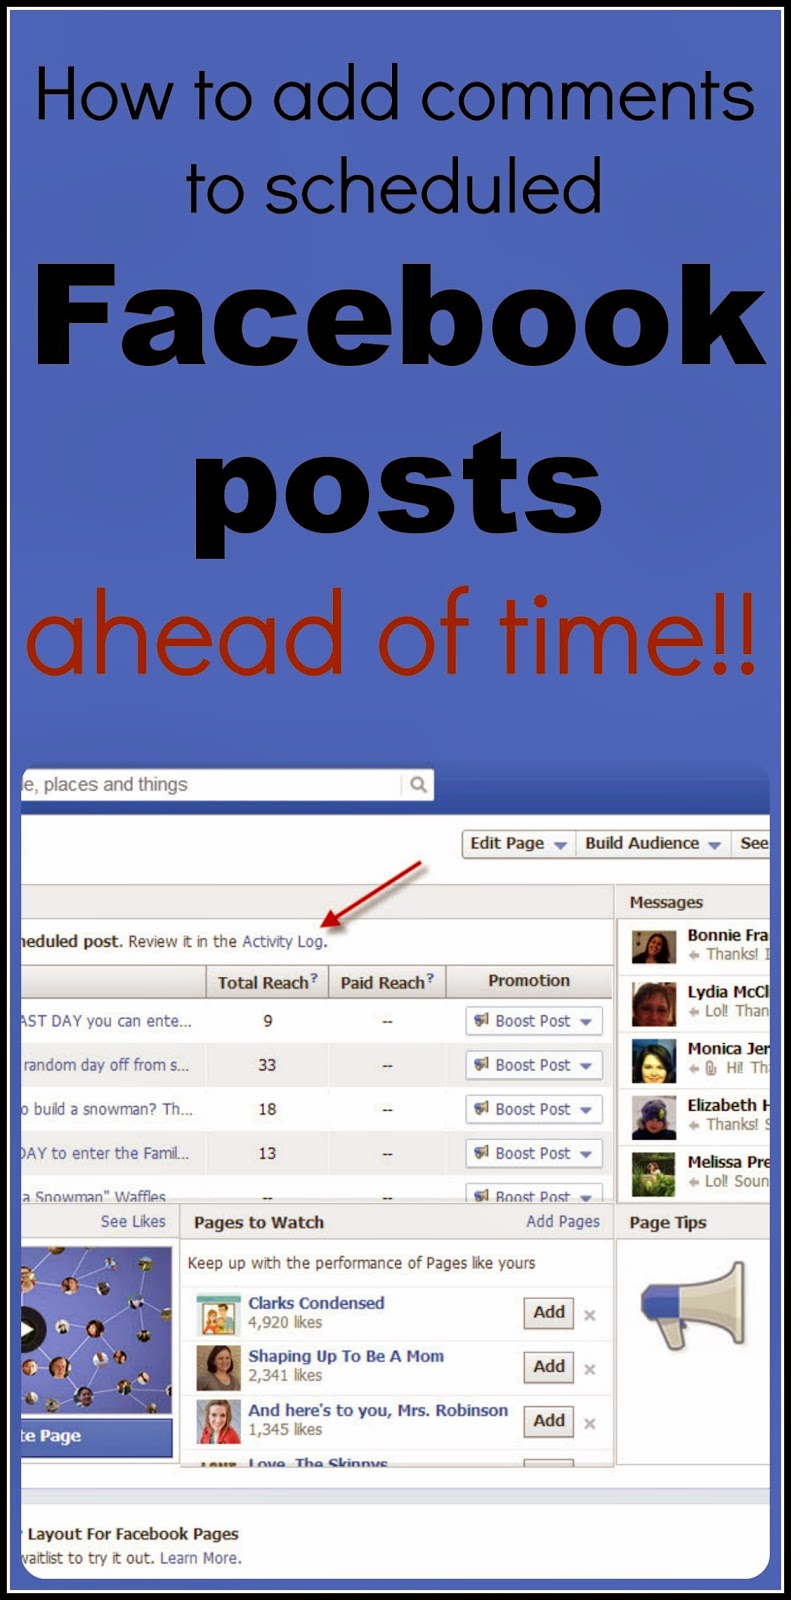 Ever wondered if there was a way to add your blog post's link in the comments of scheduled Facebook posts? Then check out this awesome trick! #blogger #facebook #bloggingtips